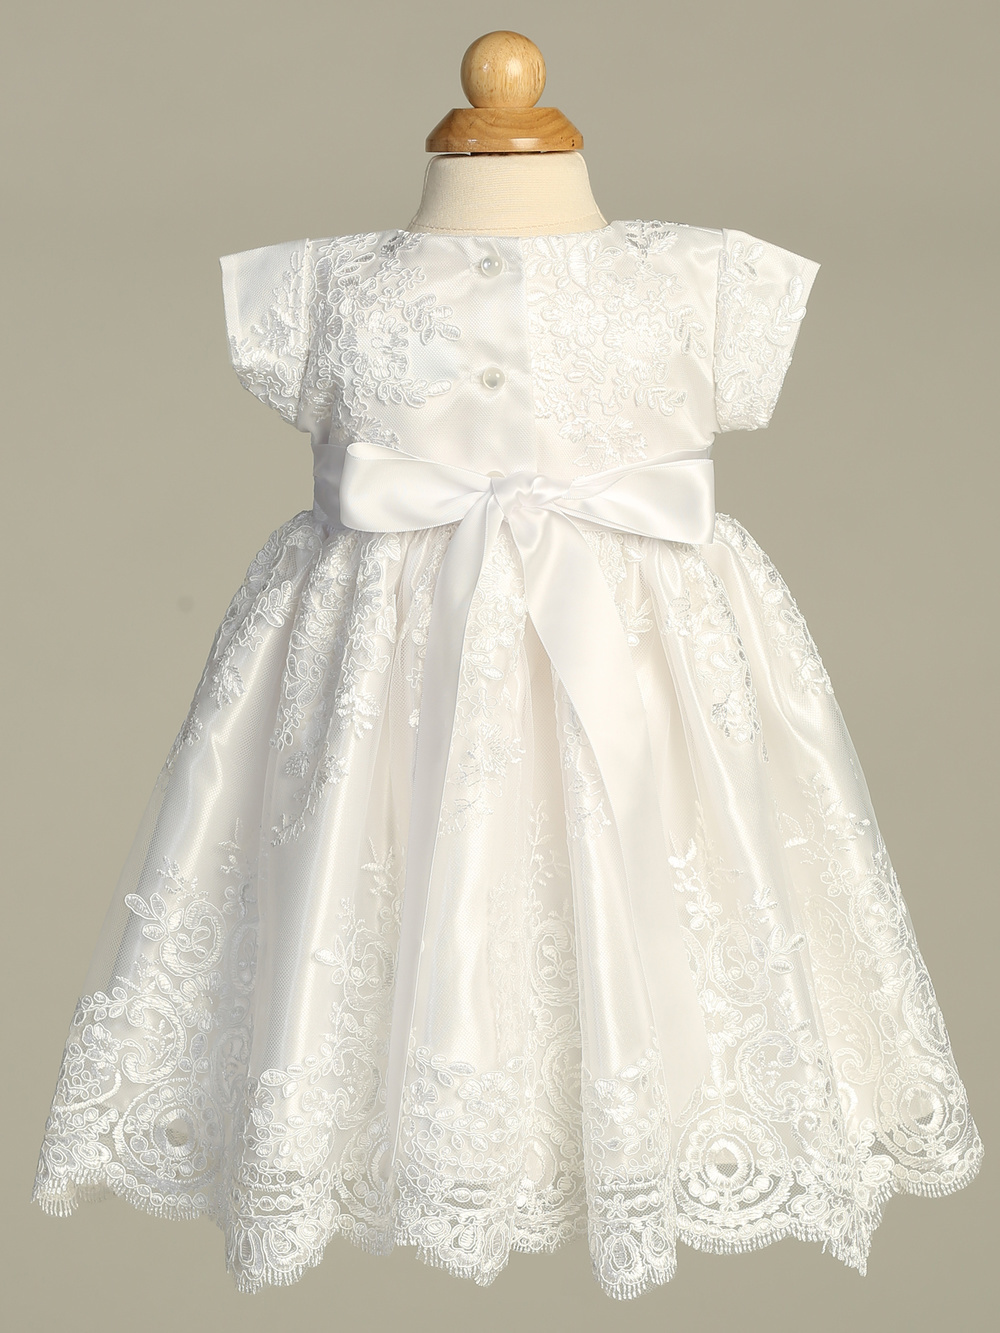 HARLOW WHT Corded and embroidered tulle dress - Girls